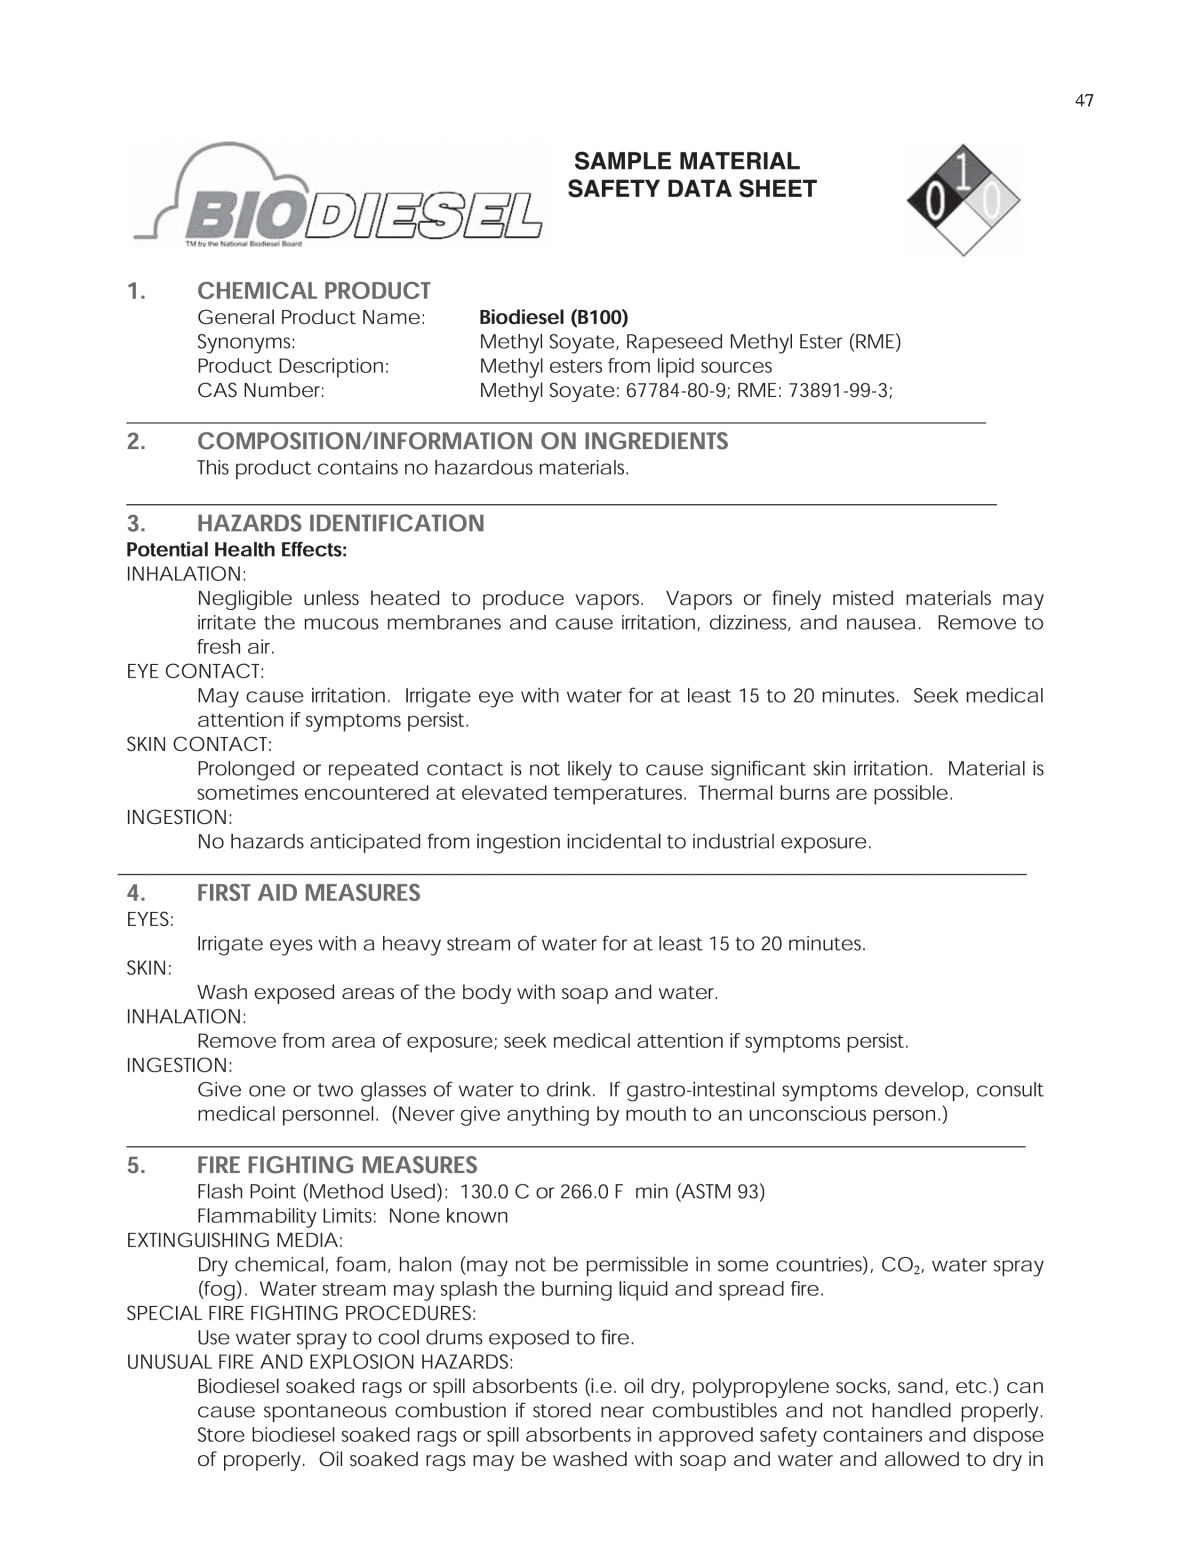 Appendix A - Sample Material Safety Data Sheet  Use of Biodiesel